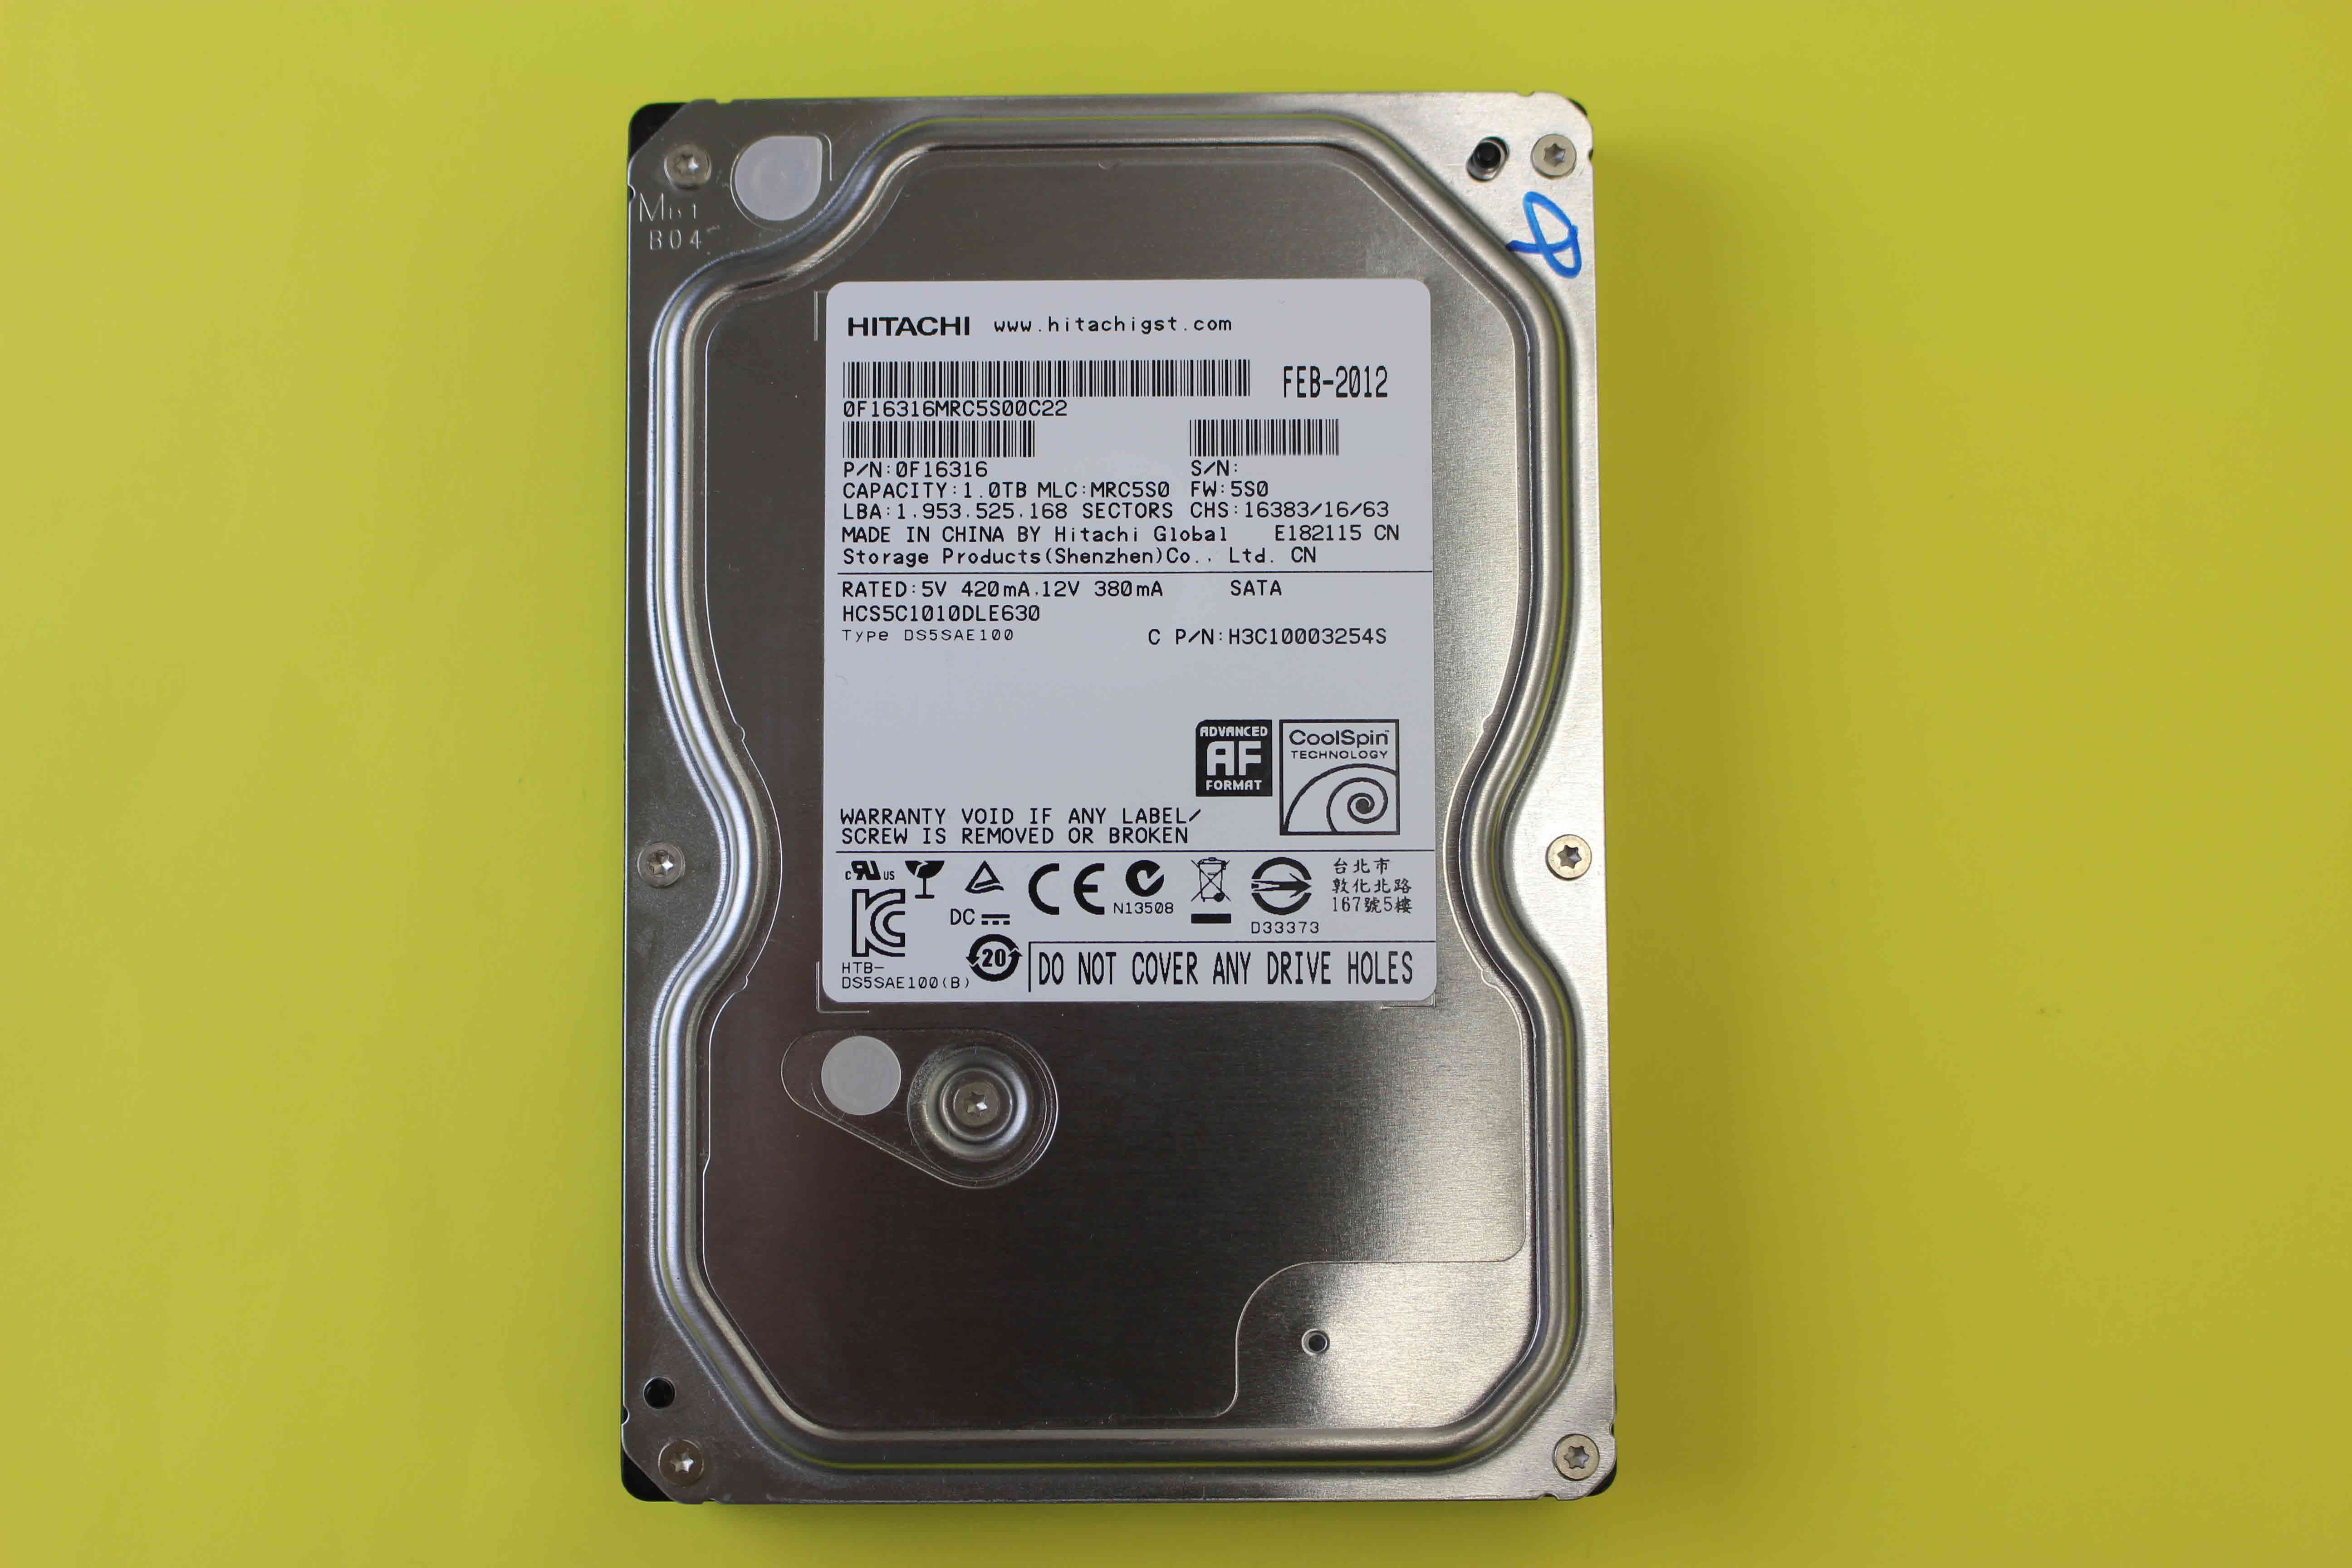 hcs5c1010dle630-recovery